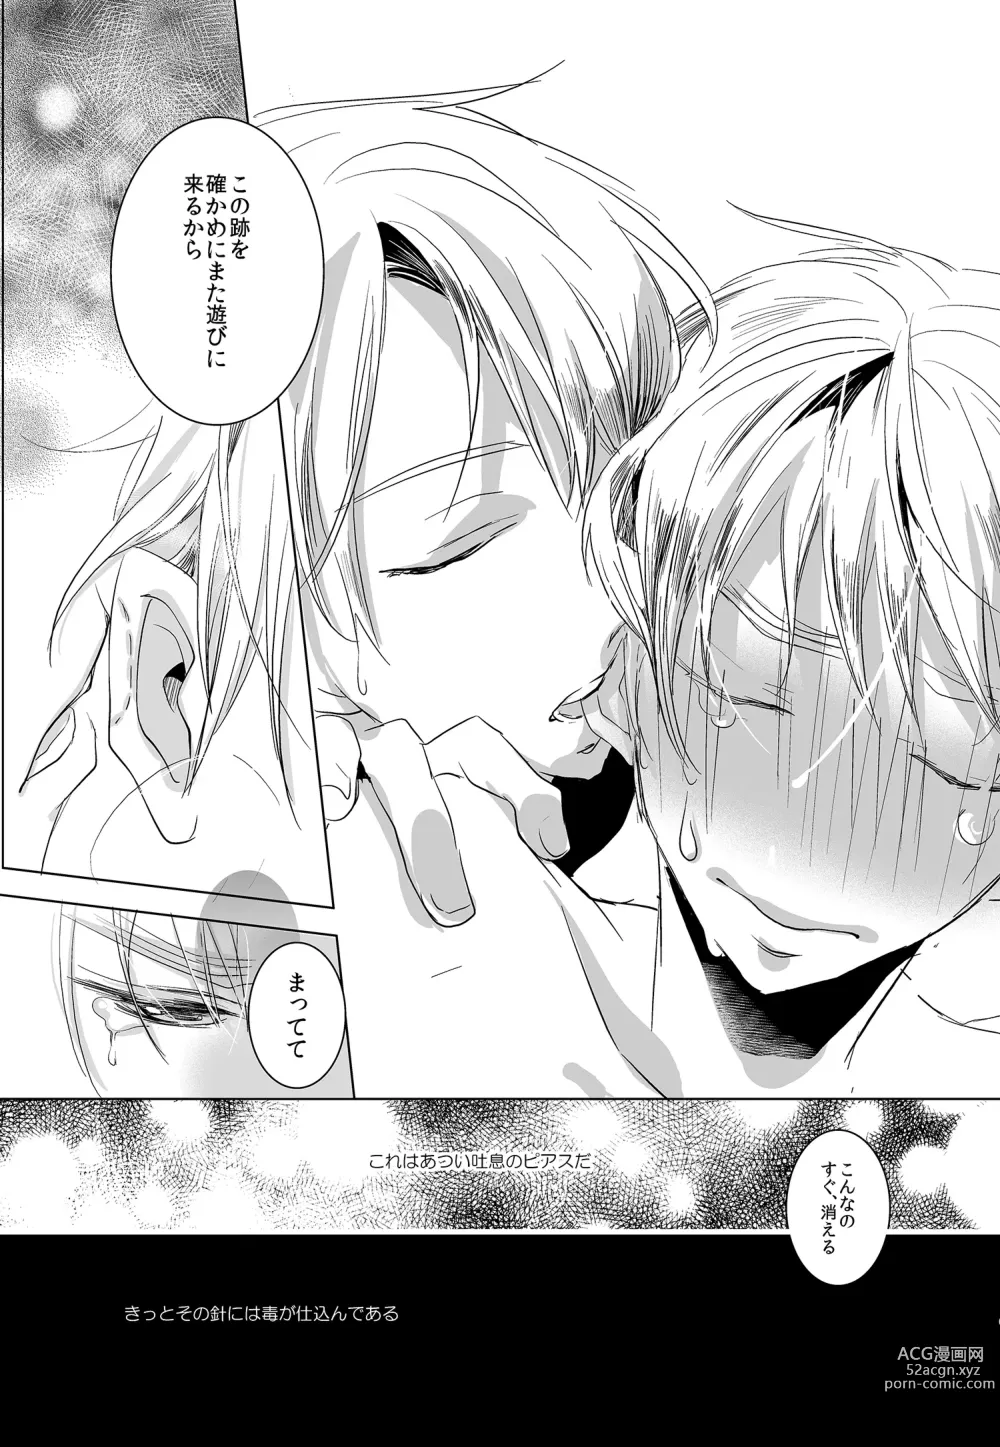 Page 24 of doujinshi Flare Pierce